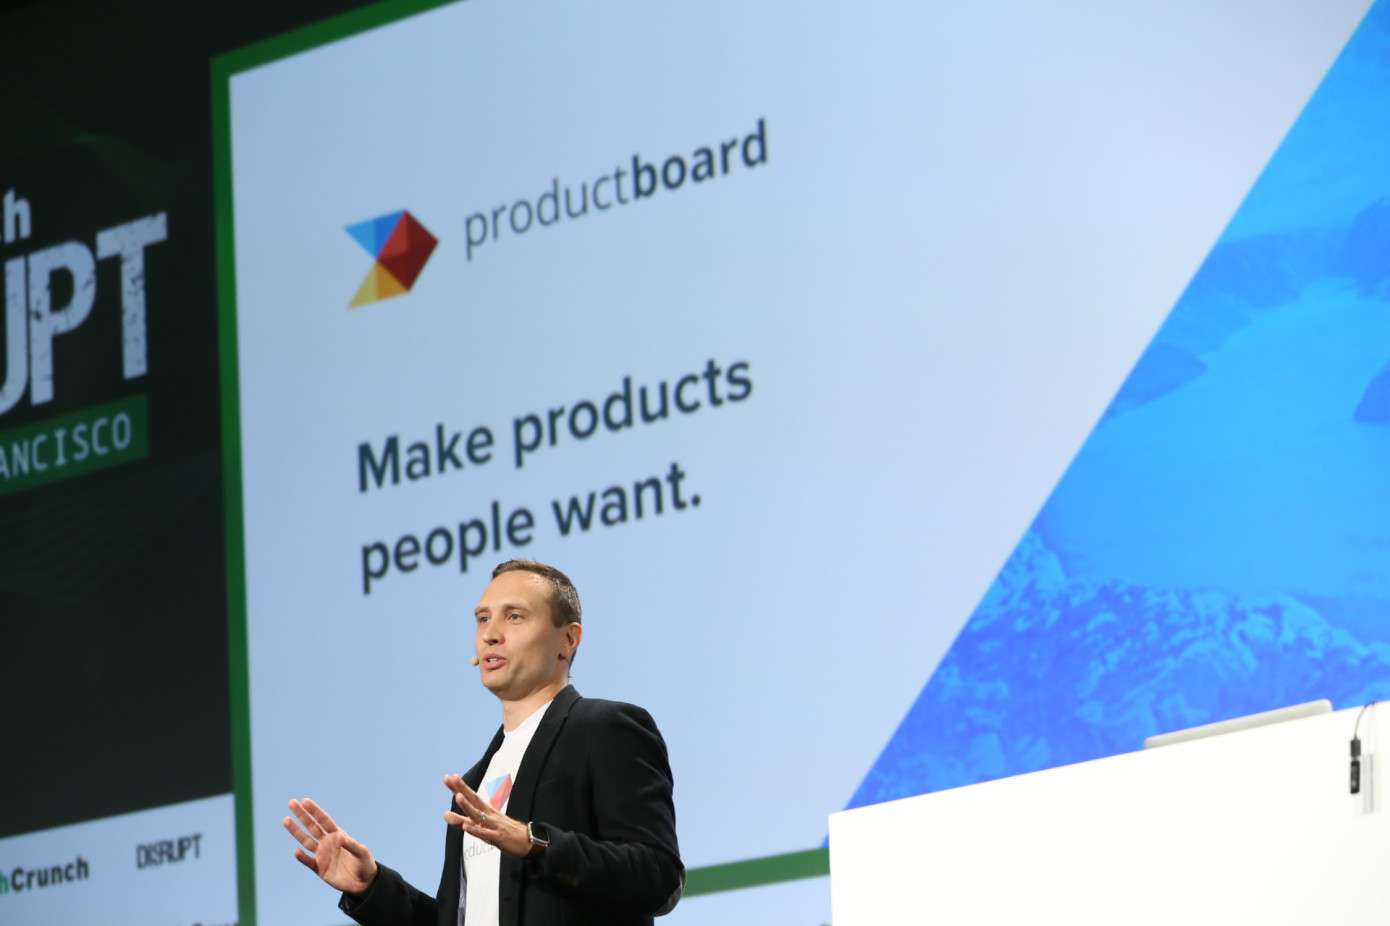 Hubert Palan, CEO and co-founder of productboard